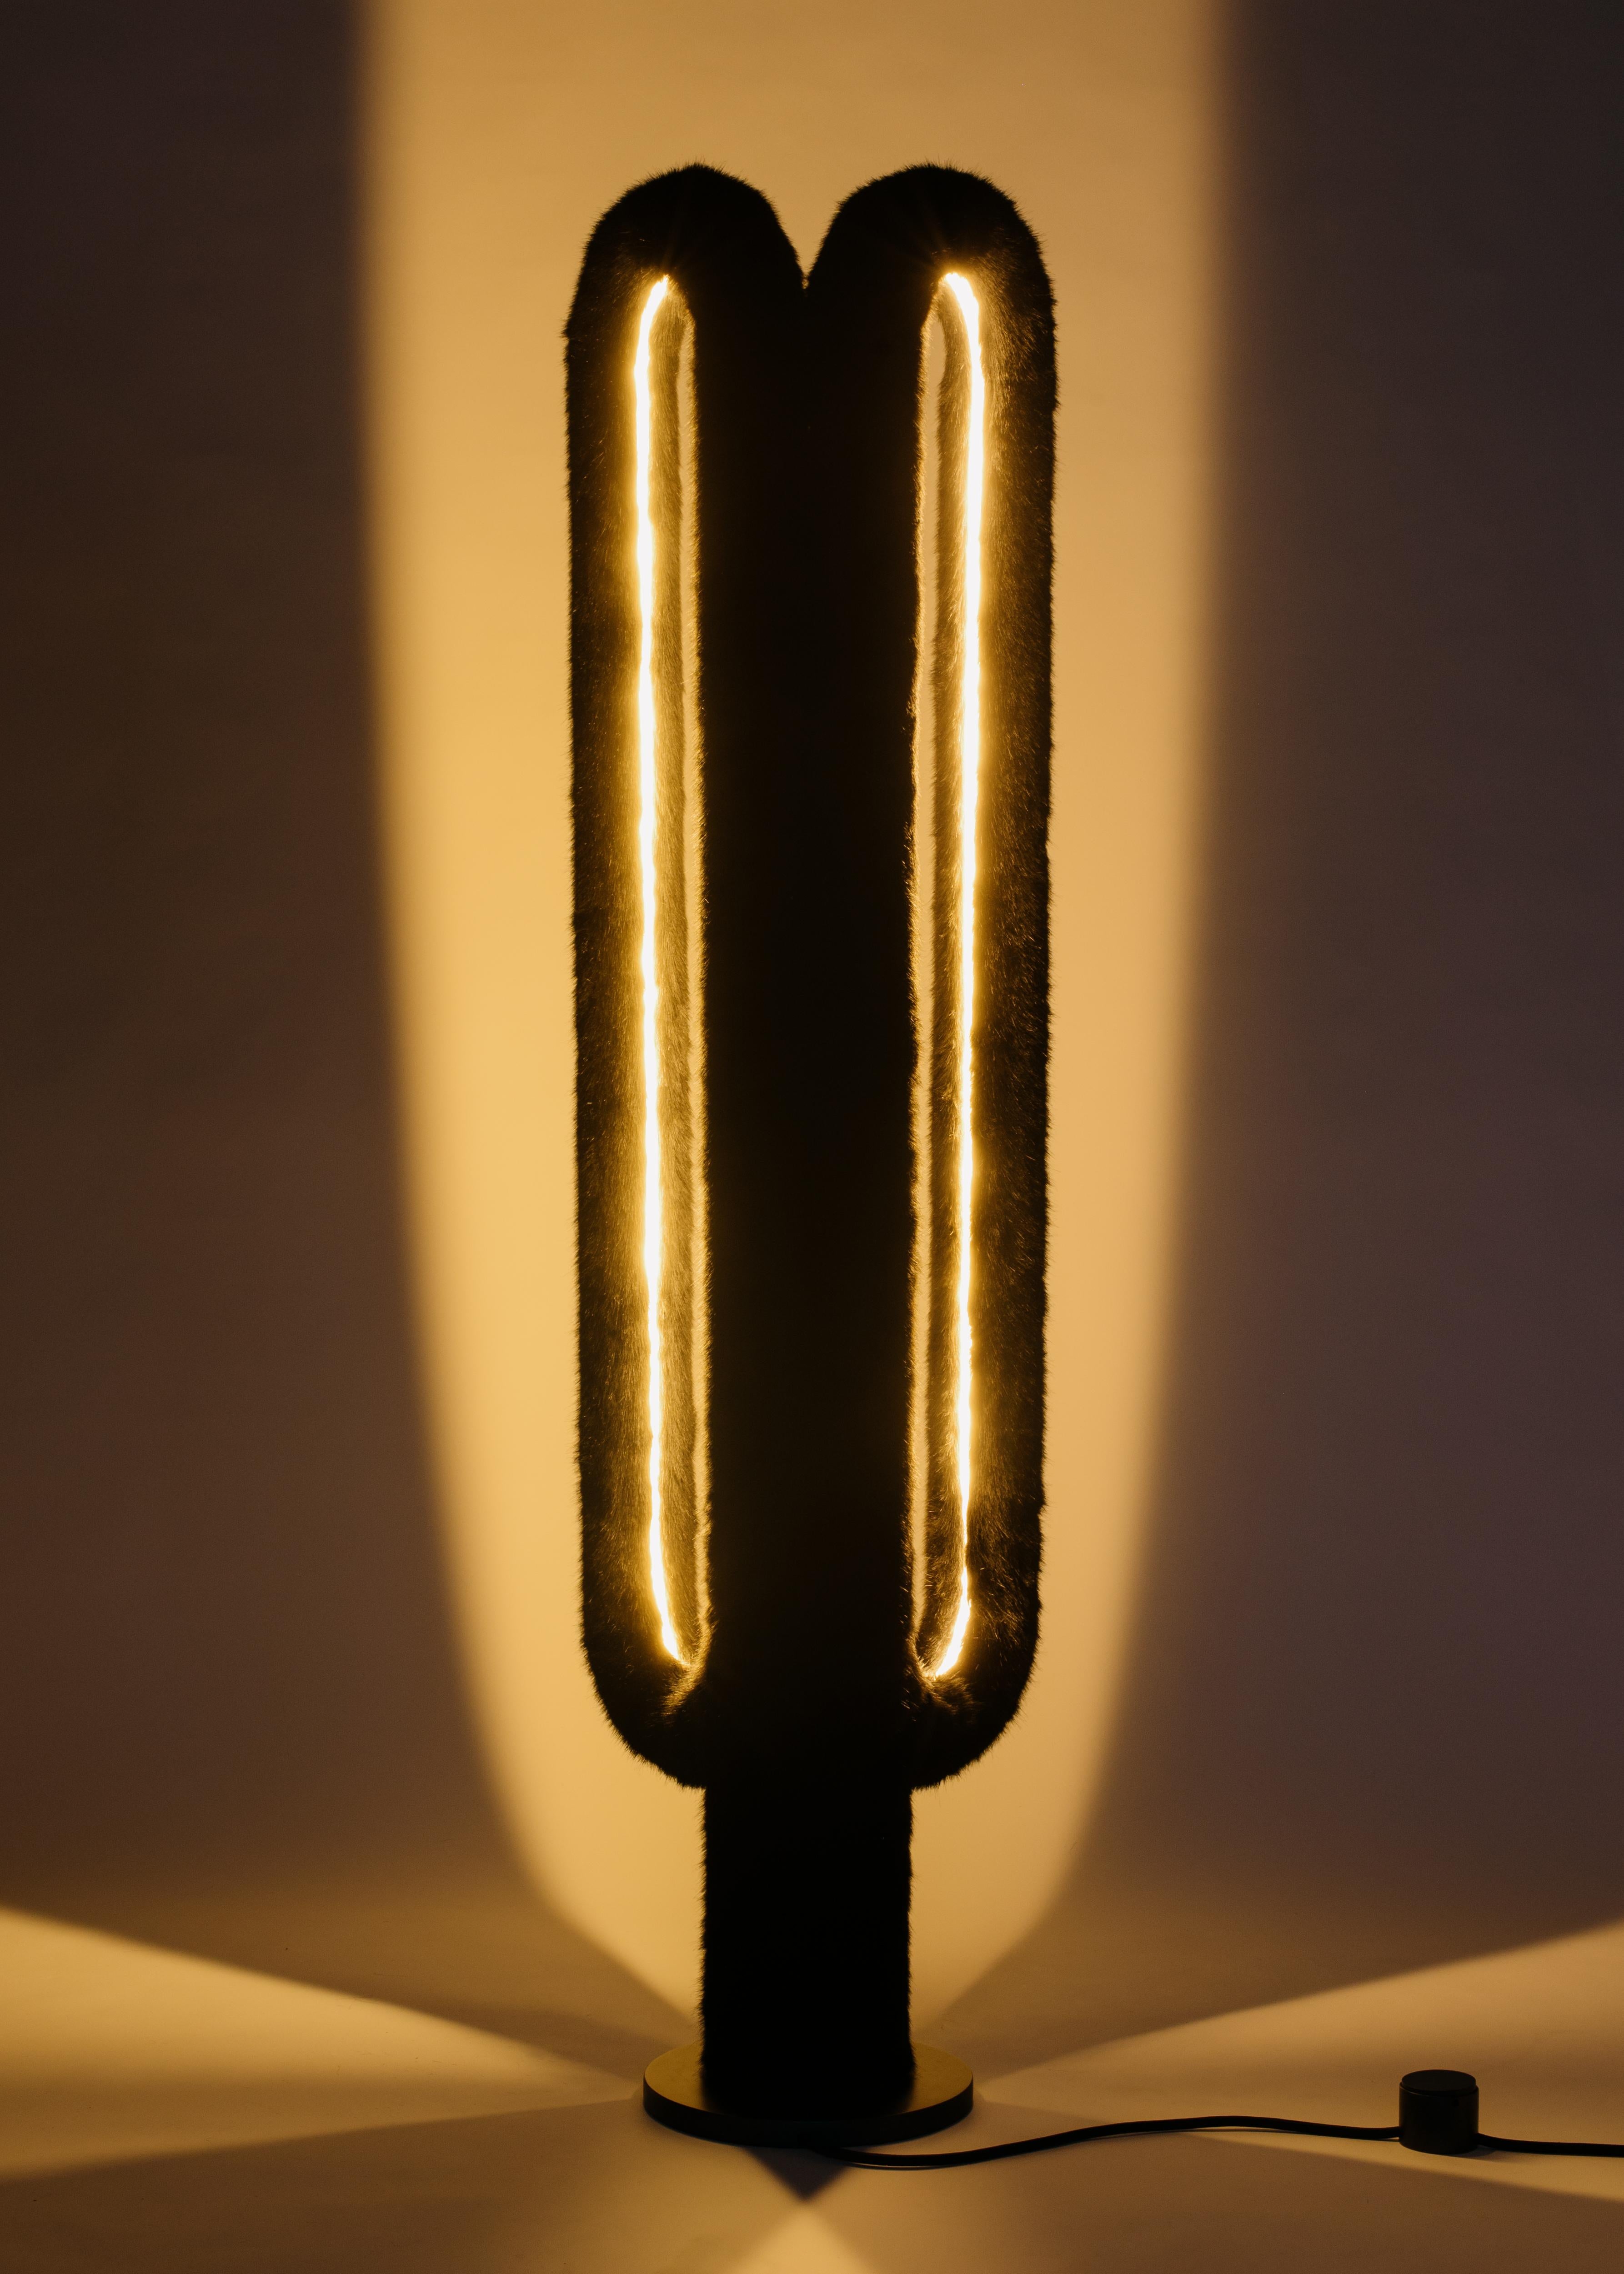 The Artiodactyl Floor Lamp features two standing cylindrical loops of illuminated fur. They glow from the inside of their contours, creating twin pockets of light that accentuate their symmetry and ricochet throughout a room. The lamp is inspired by